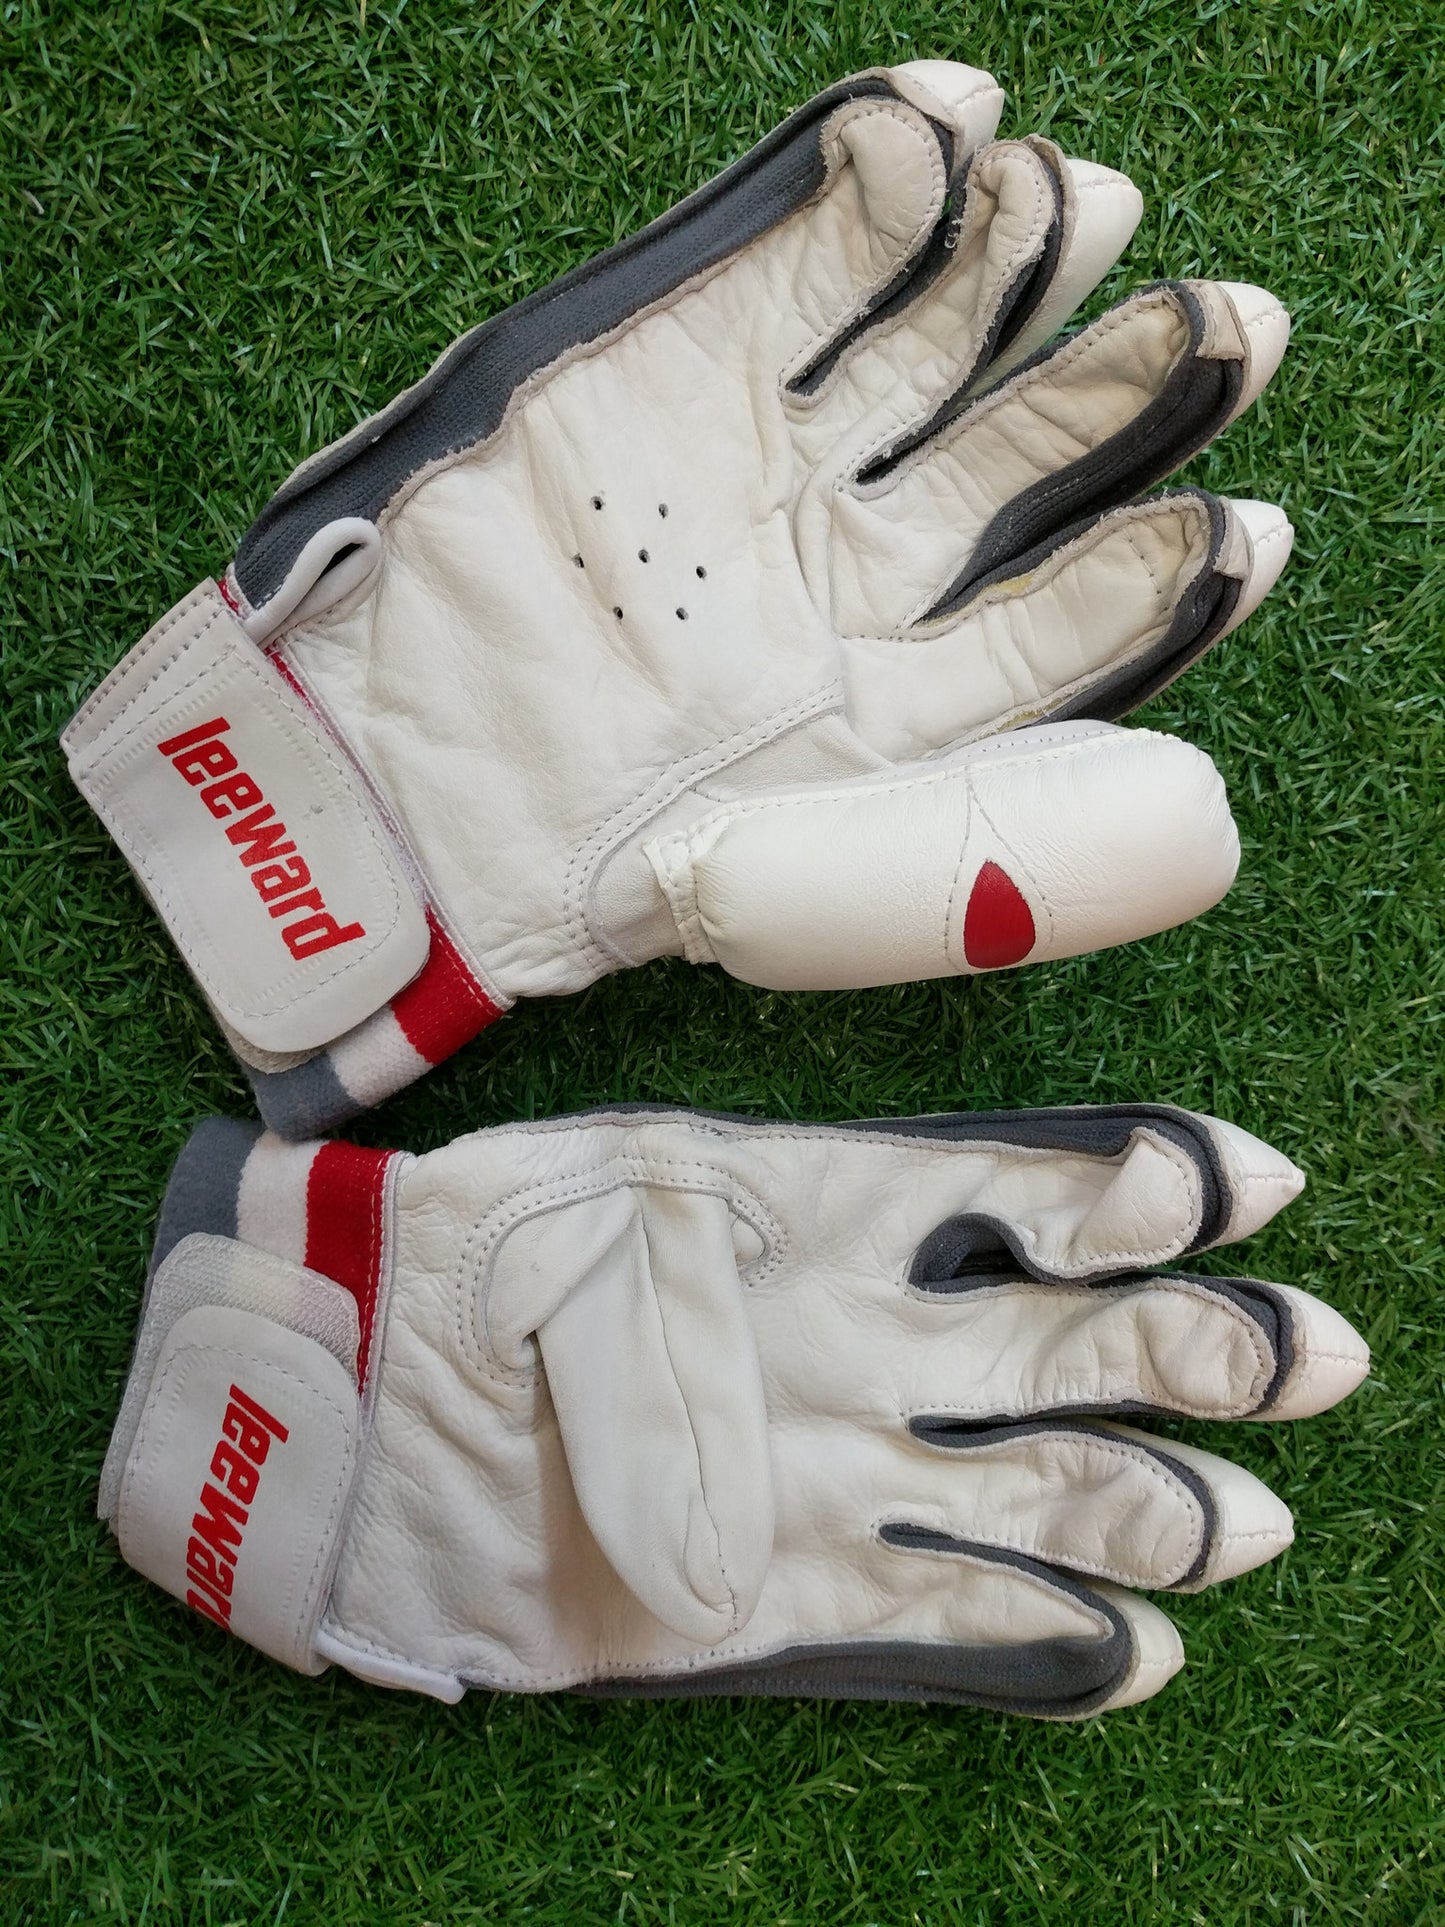 Mitre Youths Right handed Cricket batting gloves.